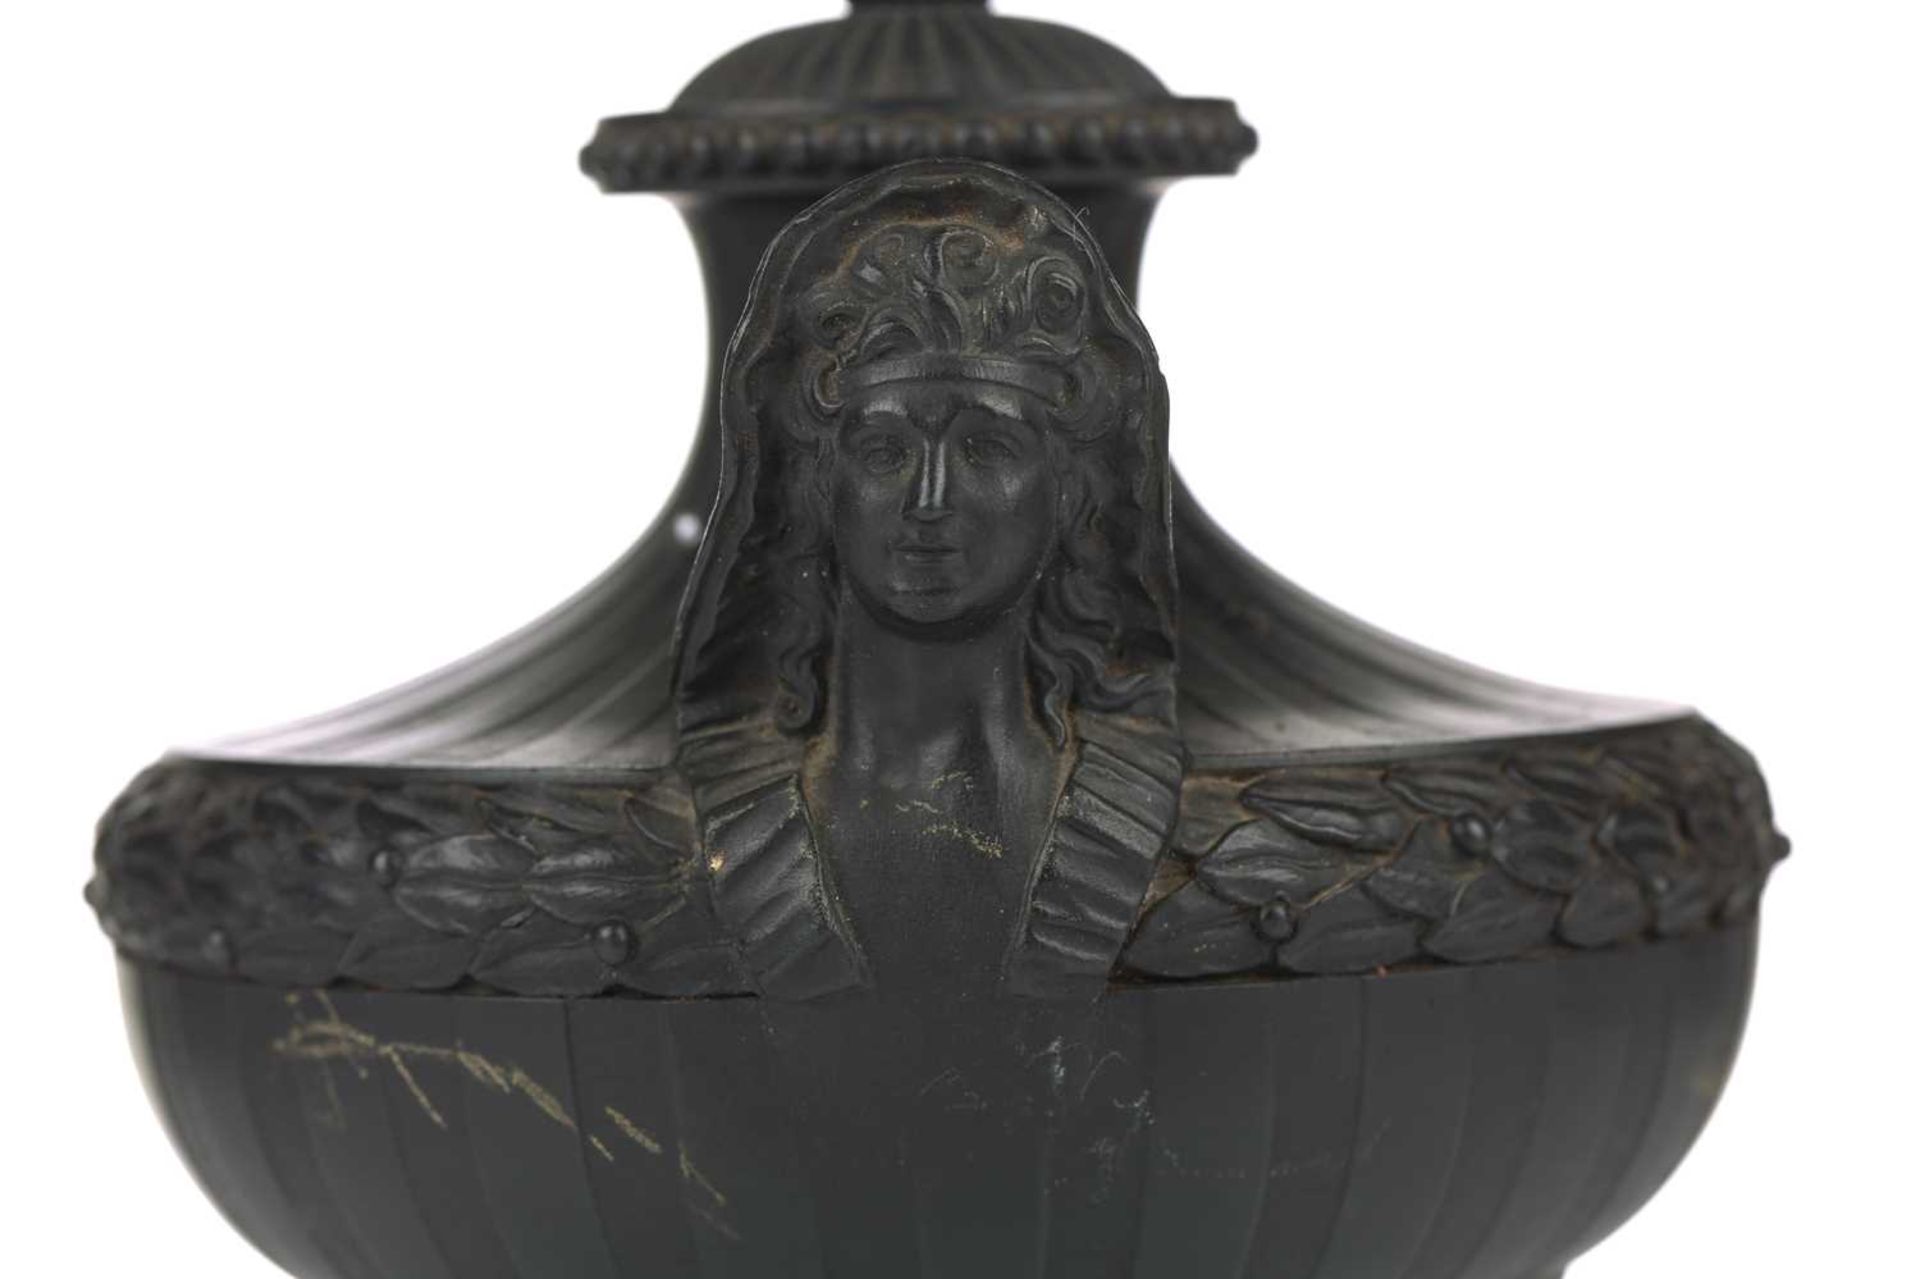 Wedgwood & Bentley, Etruria: a late 18th century black basalt urn and cover, of Classical form - Image 7 of 15